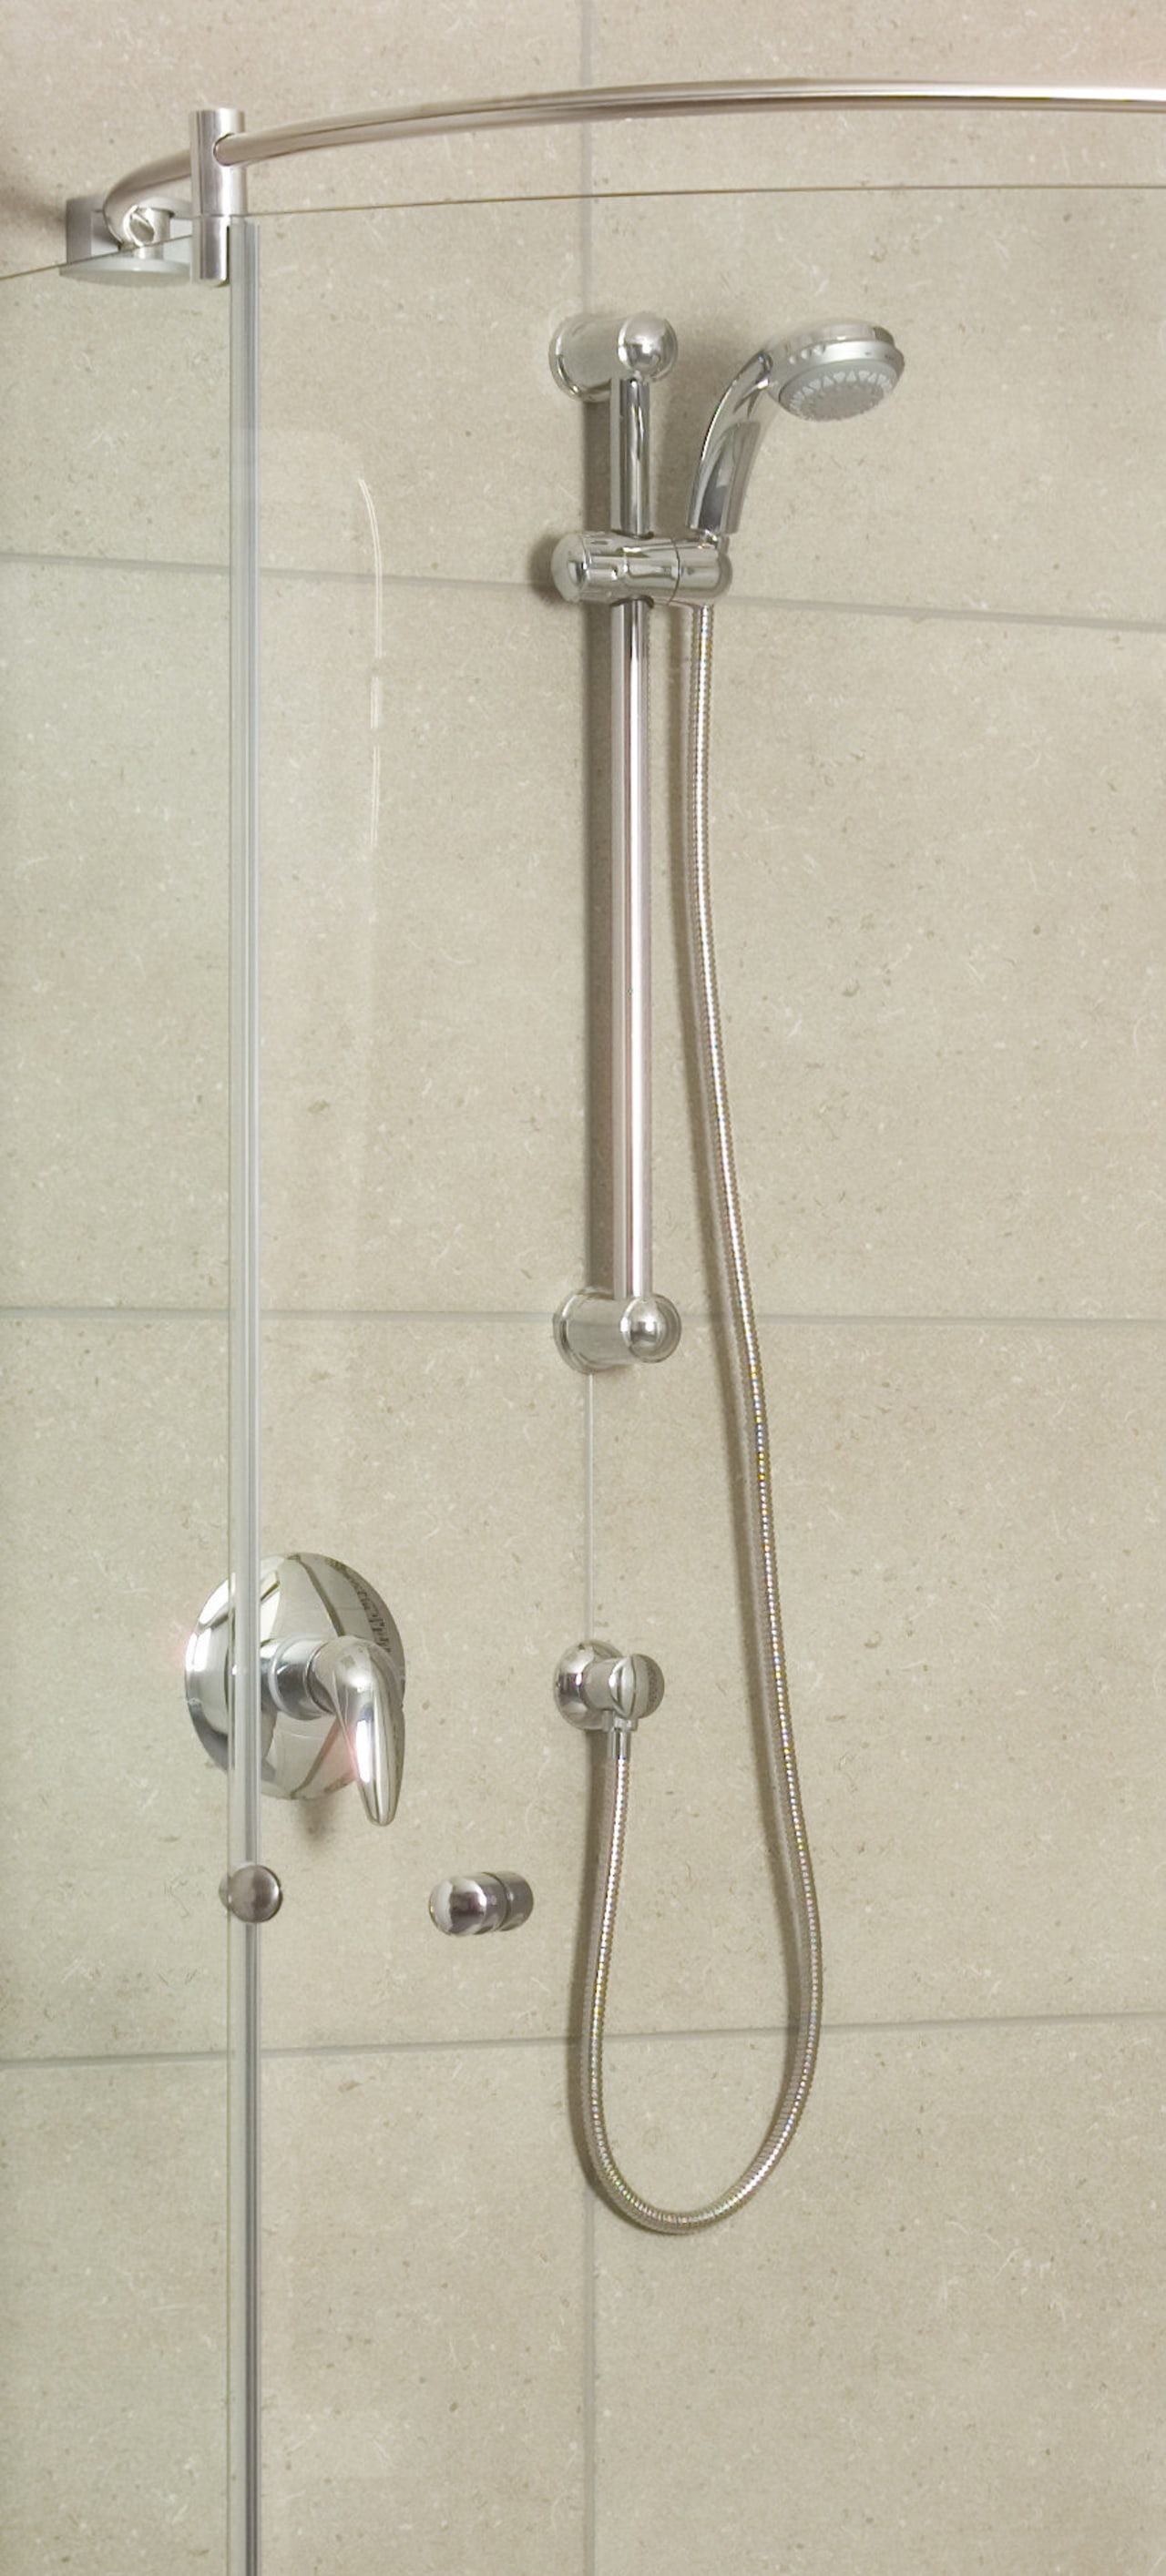 Image of the Englefield Ario curved frameless glass hardware, plumbing, plumbing fixture, product design, shower, tap, gray